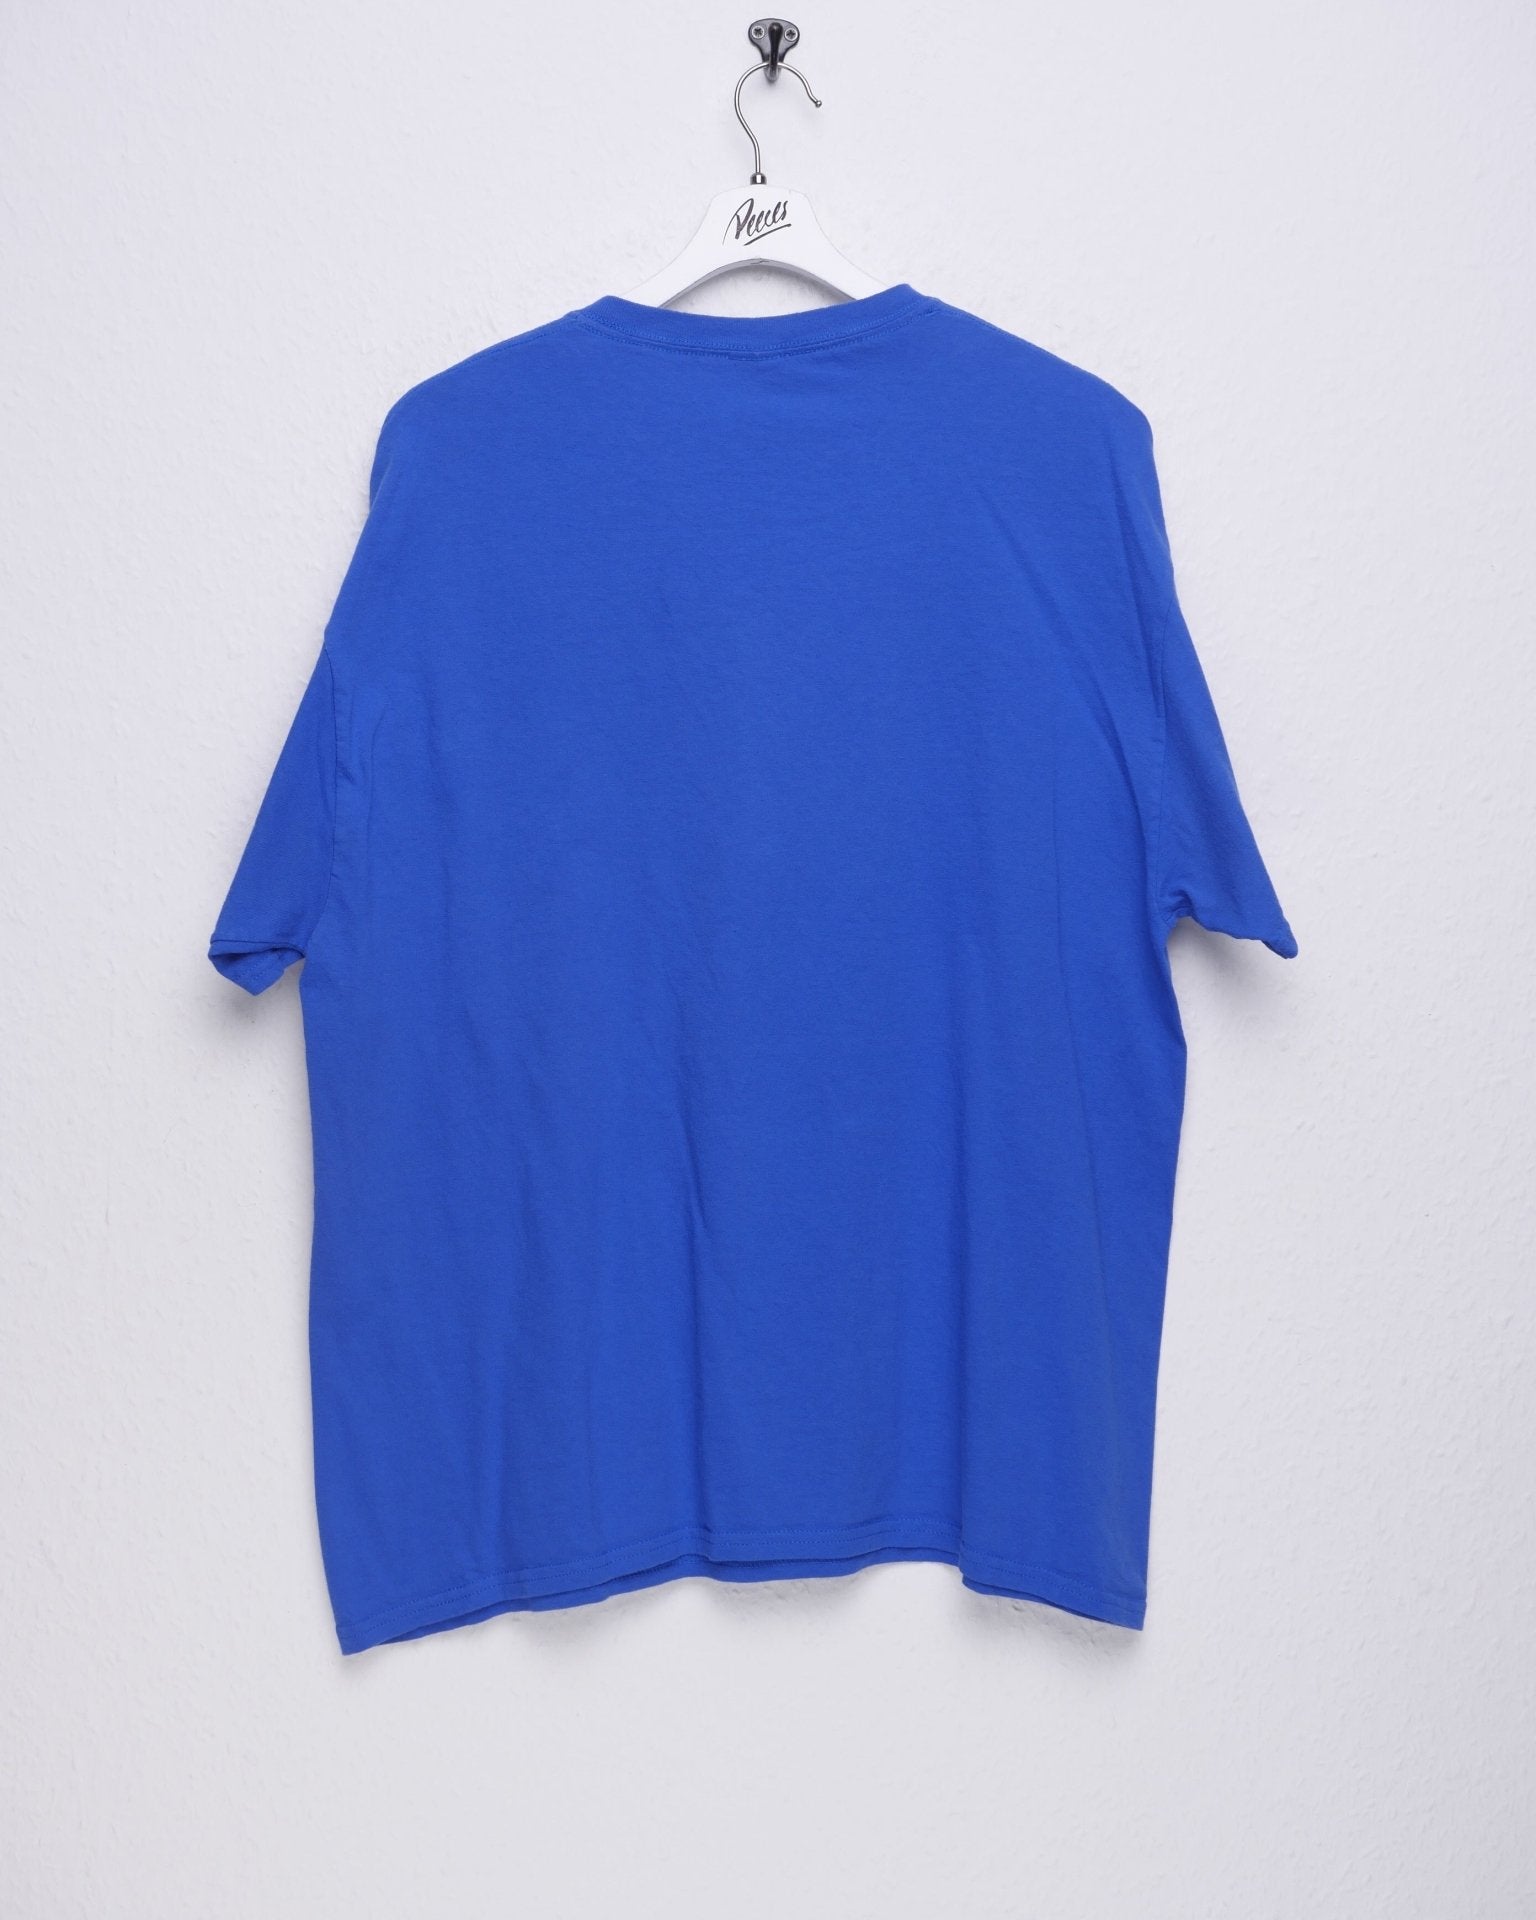 printed Field Day blue Shirt - Peeces